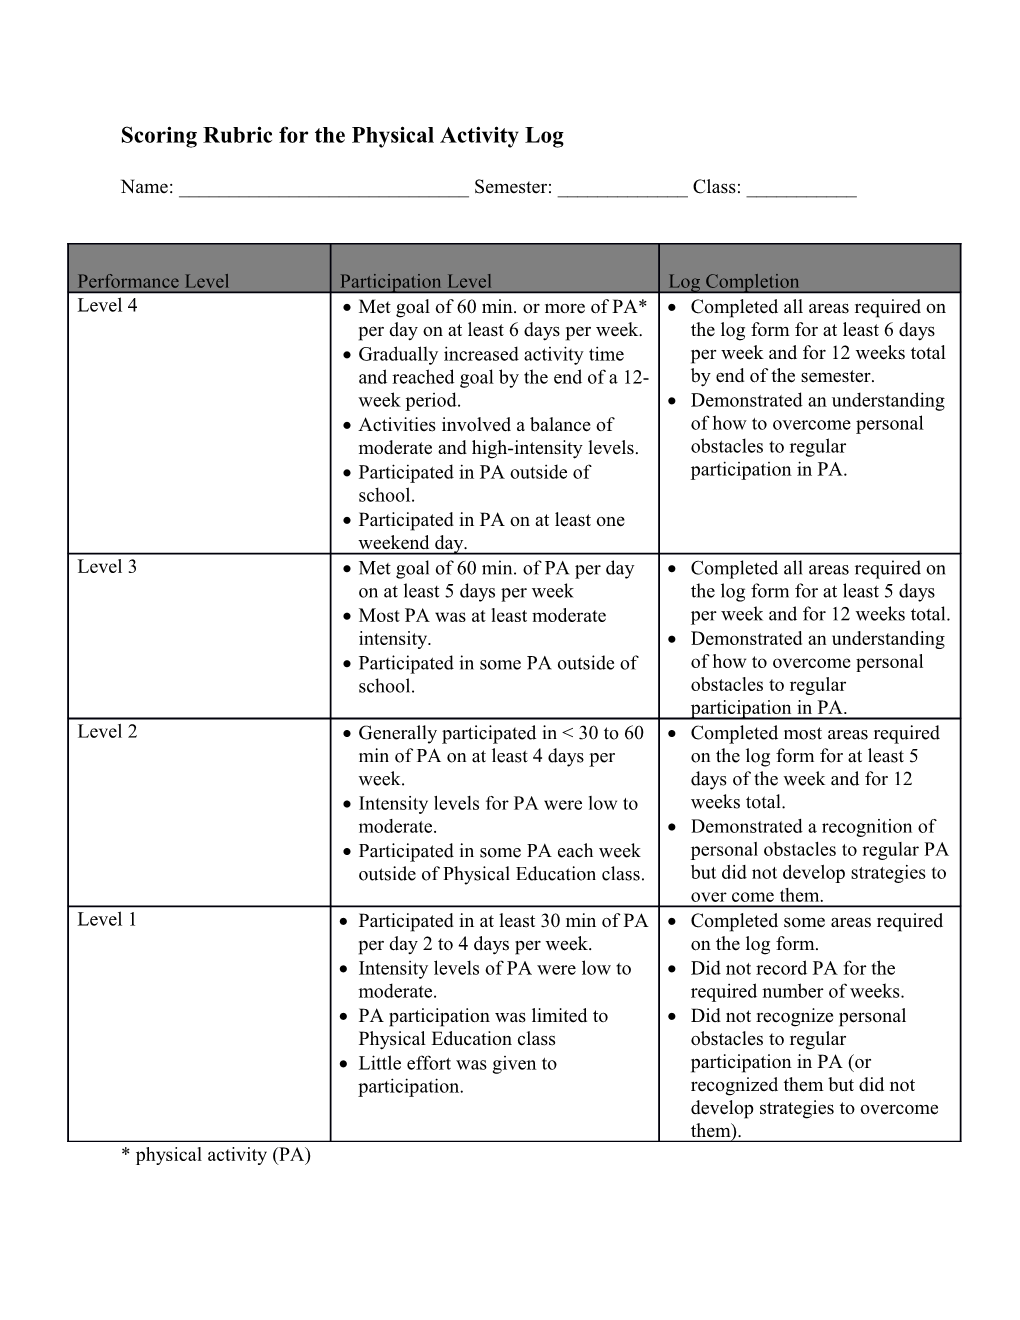 Scoring Rubric for the Physical Activity Log